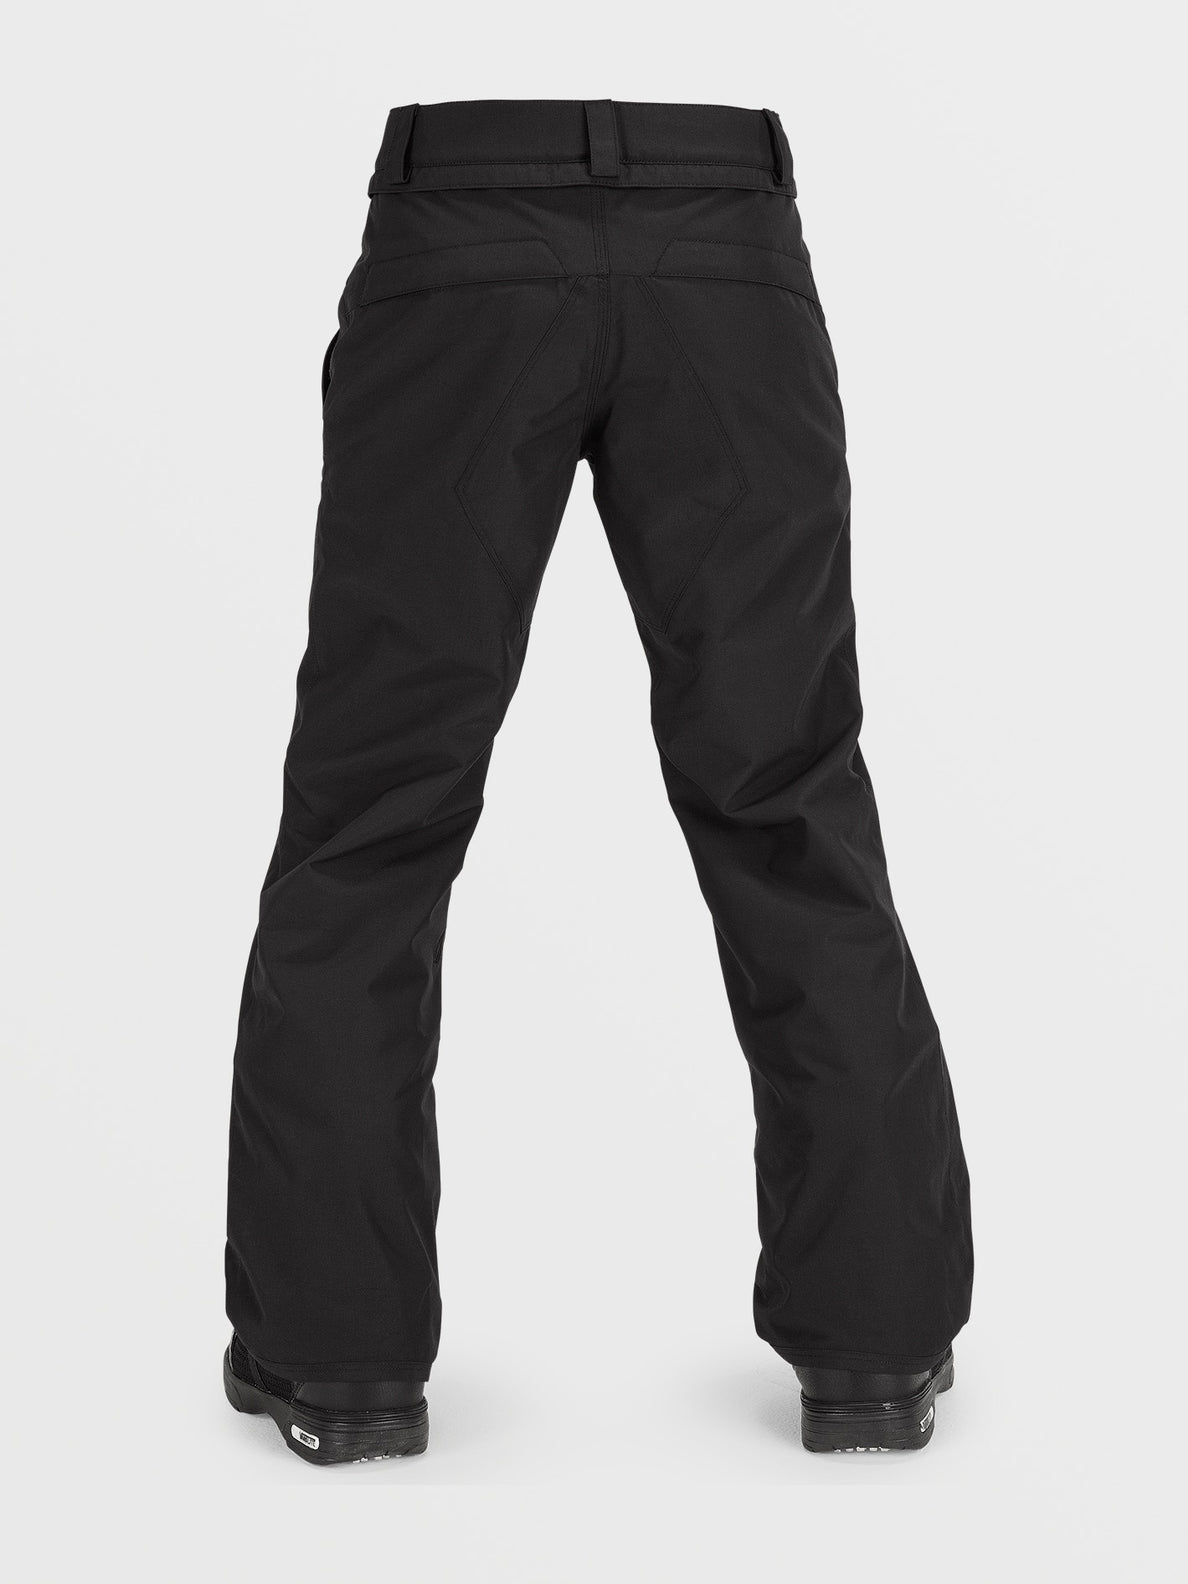 Kids Frochickidee Insulated Pants - Black